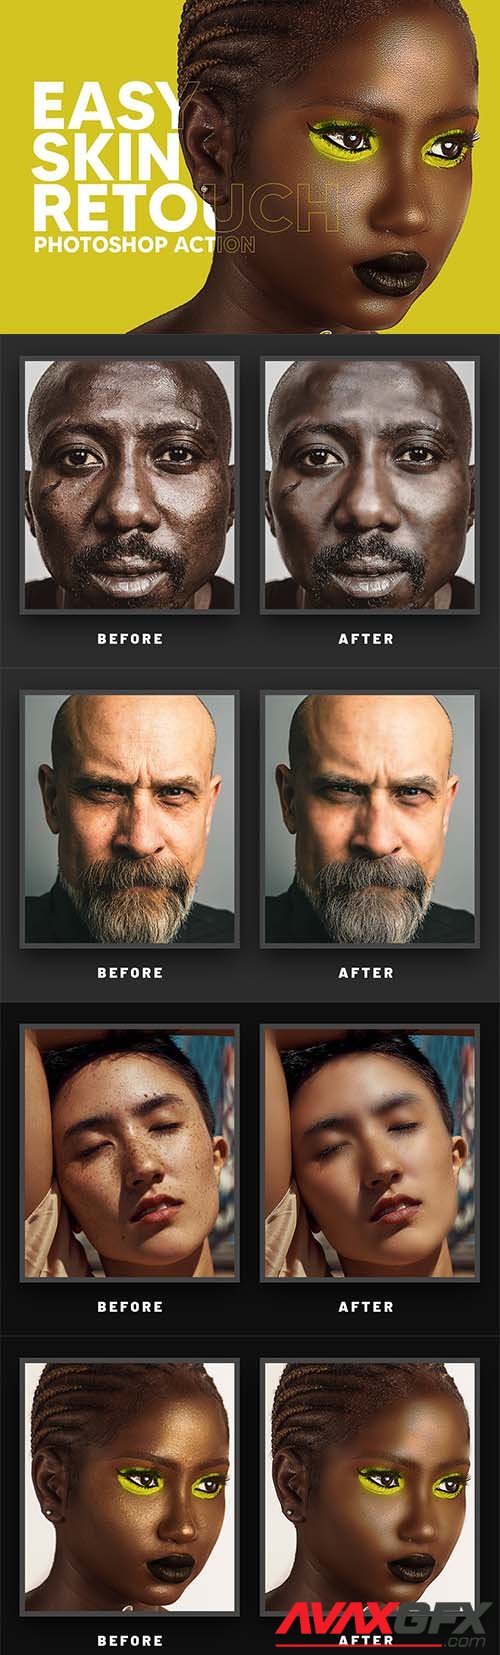 CreativeMarket - Easy Skin Retouch Ps Action 6474080